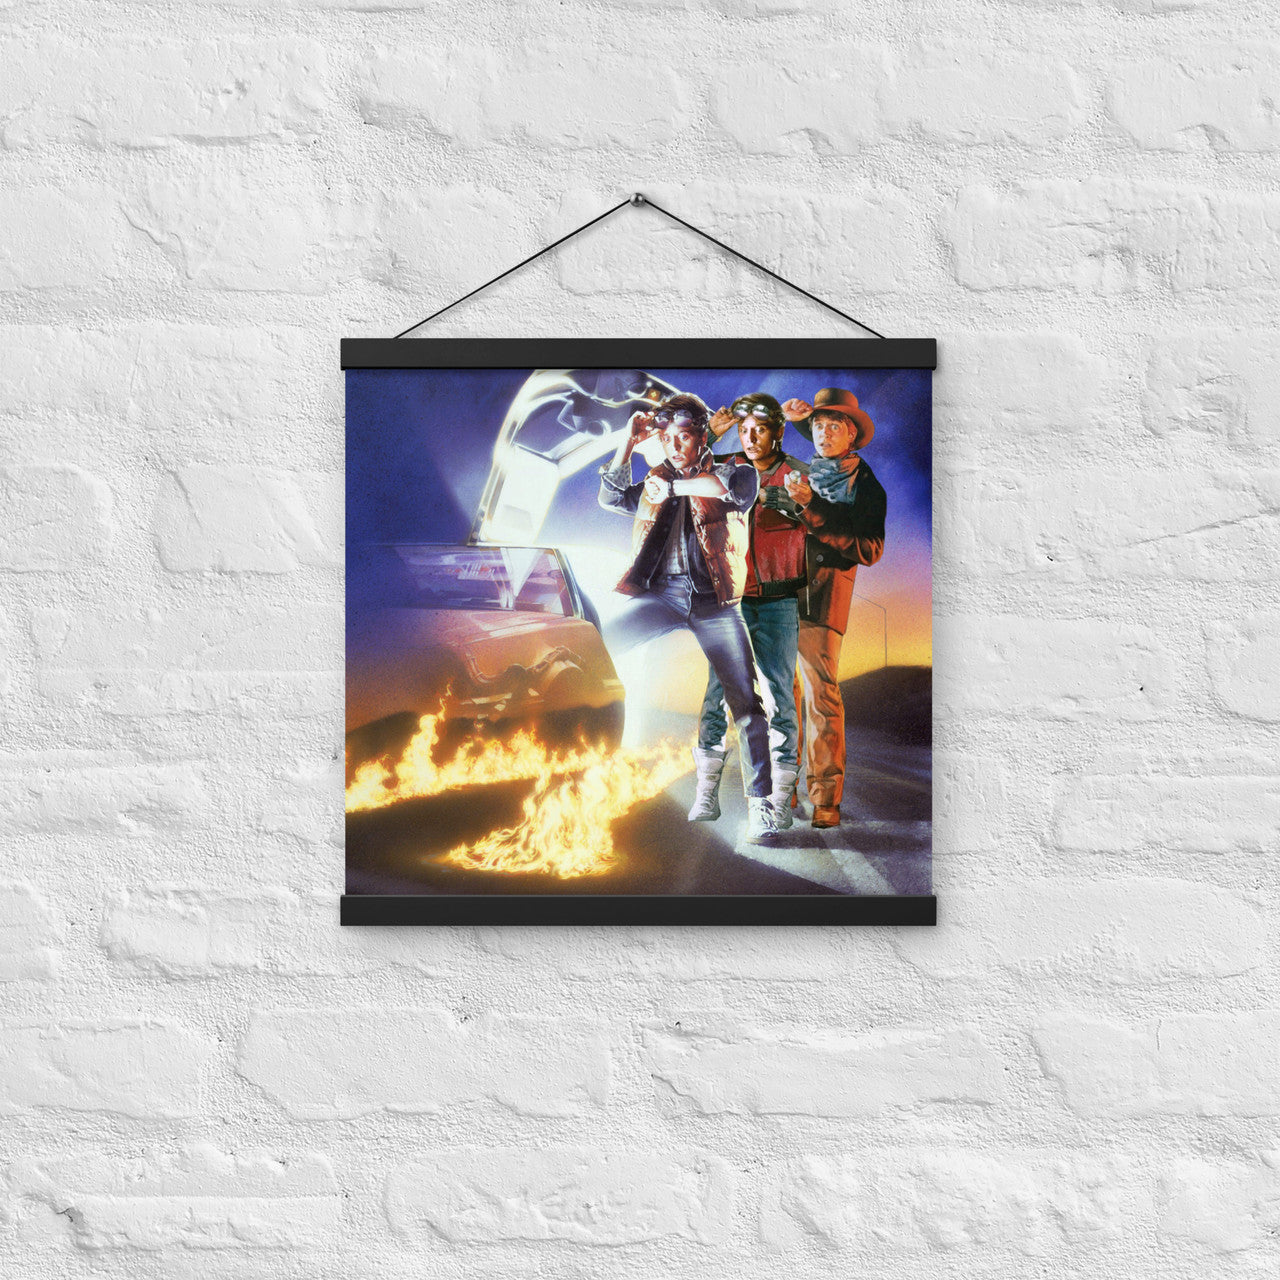 Back To The Future inspired Poster with hangers - Trilogy - Marty McFly 80s Delorean, Doc - Michael J Fox